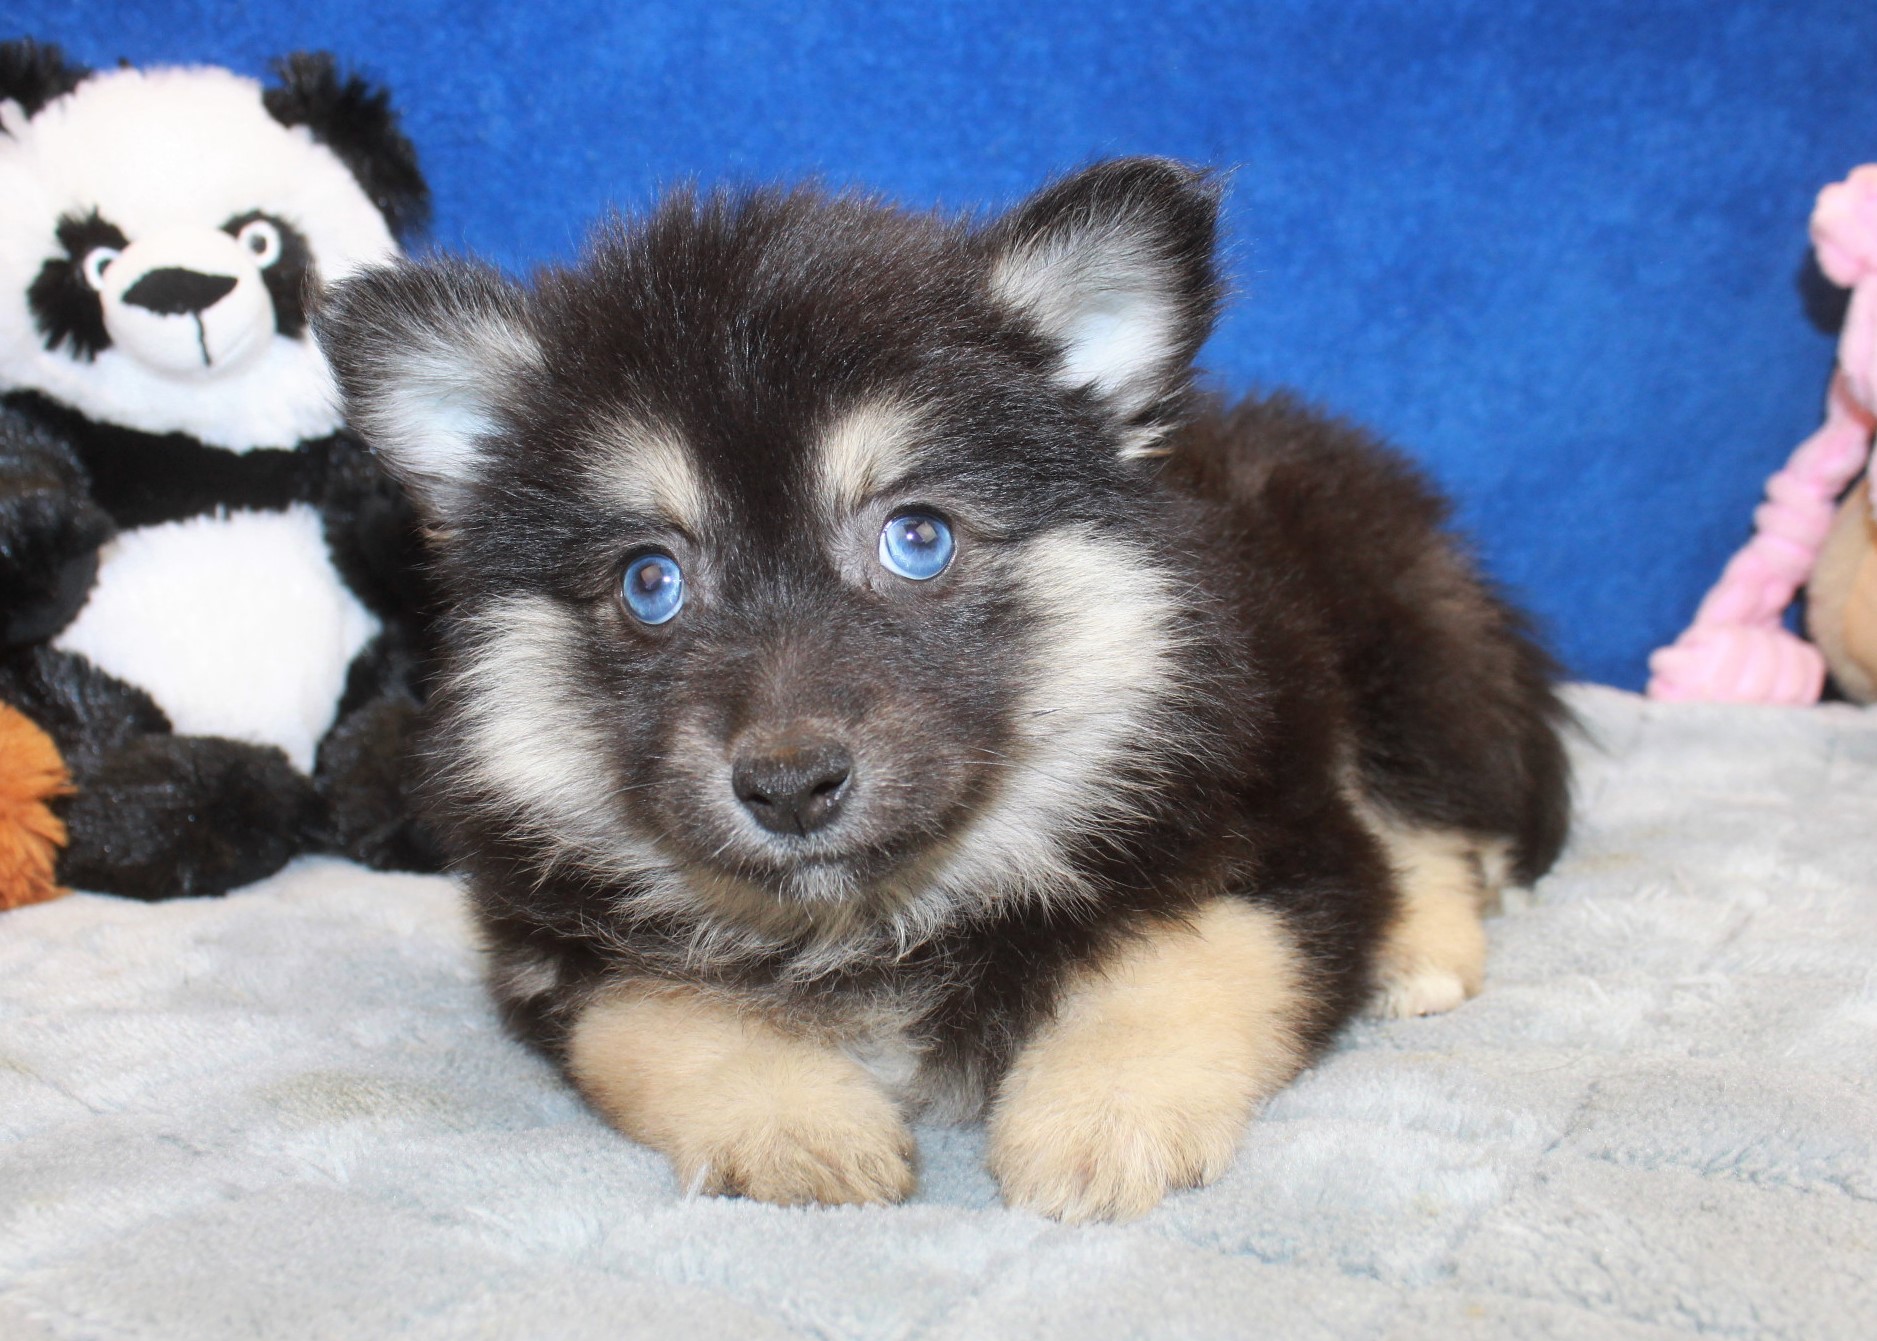 Pomsky Puppies For Sale - Long Island Puppies